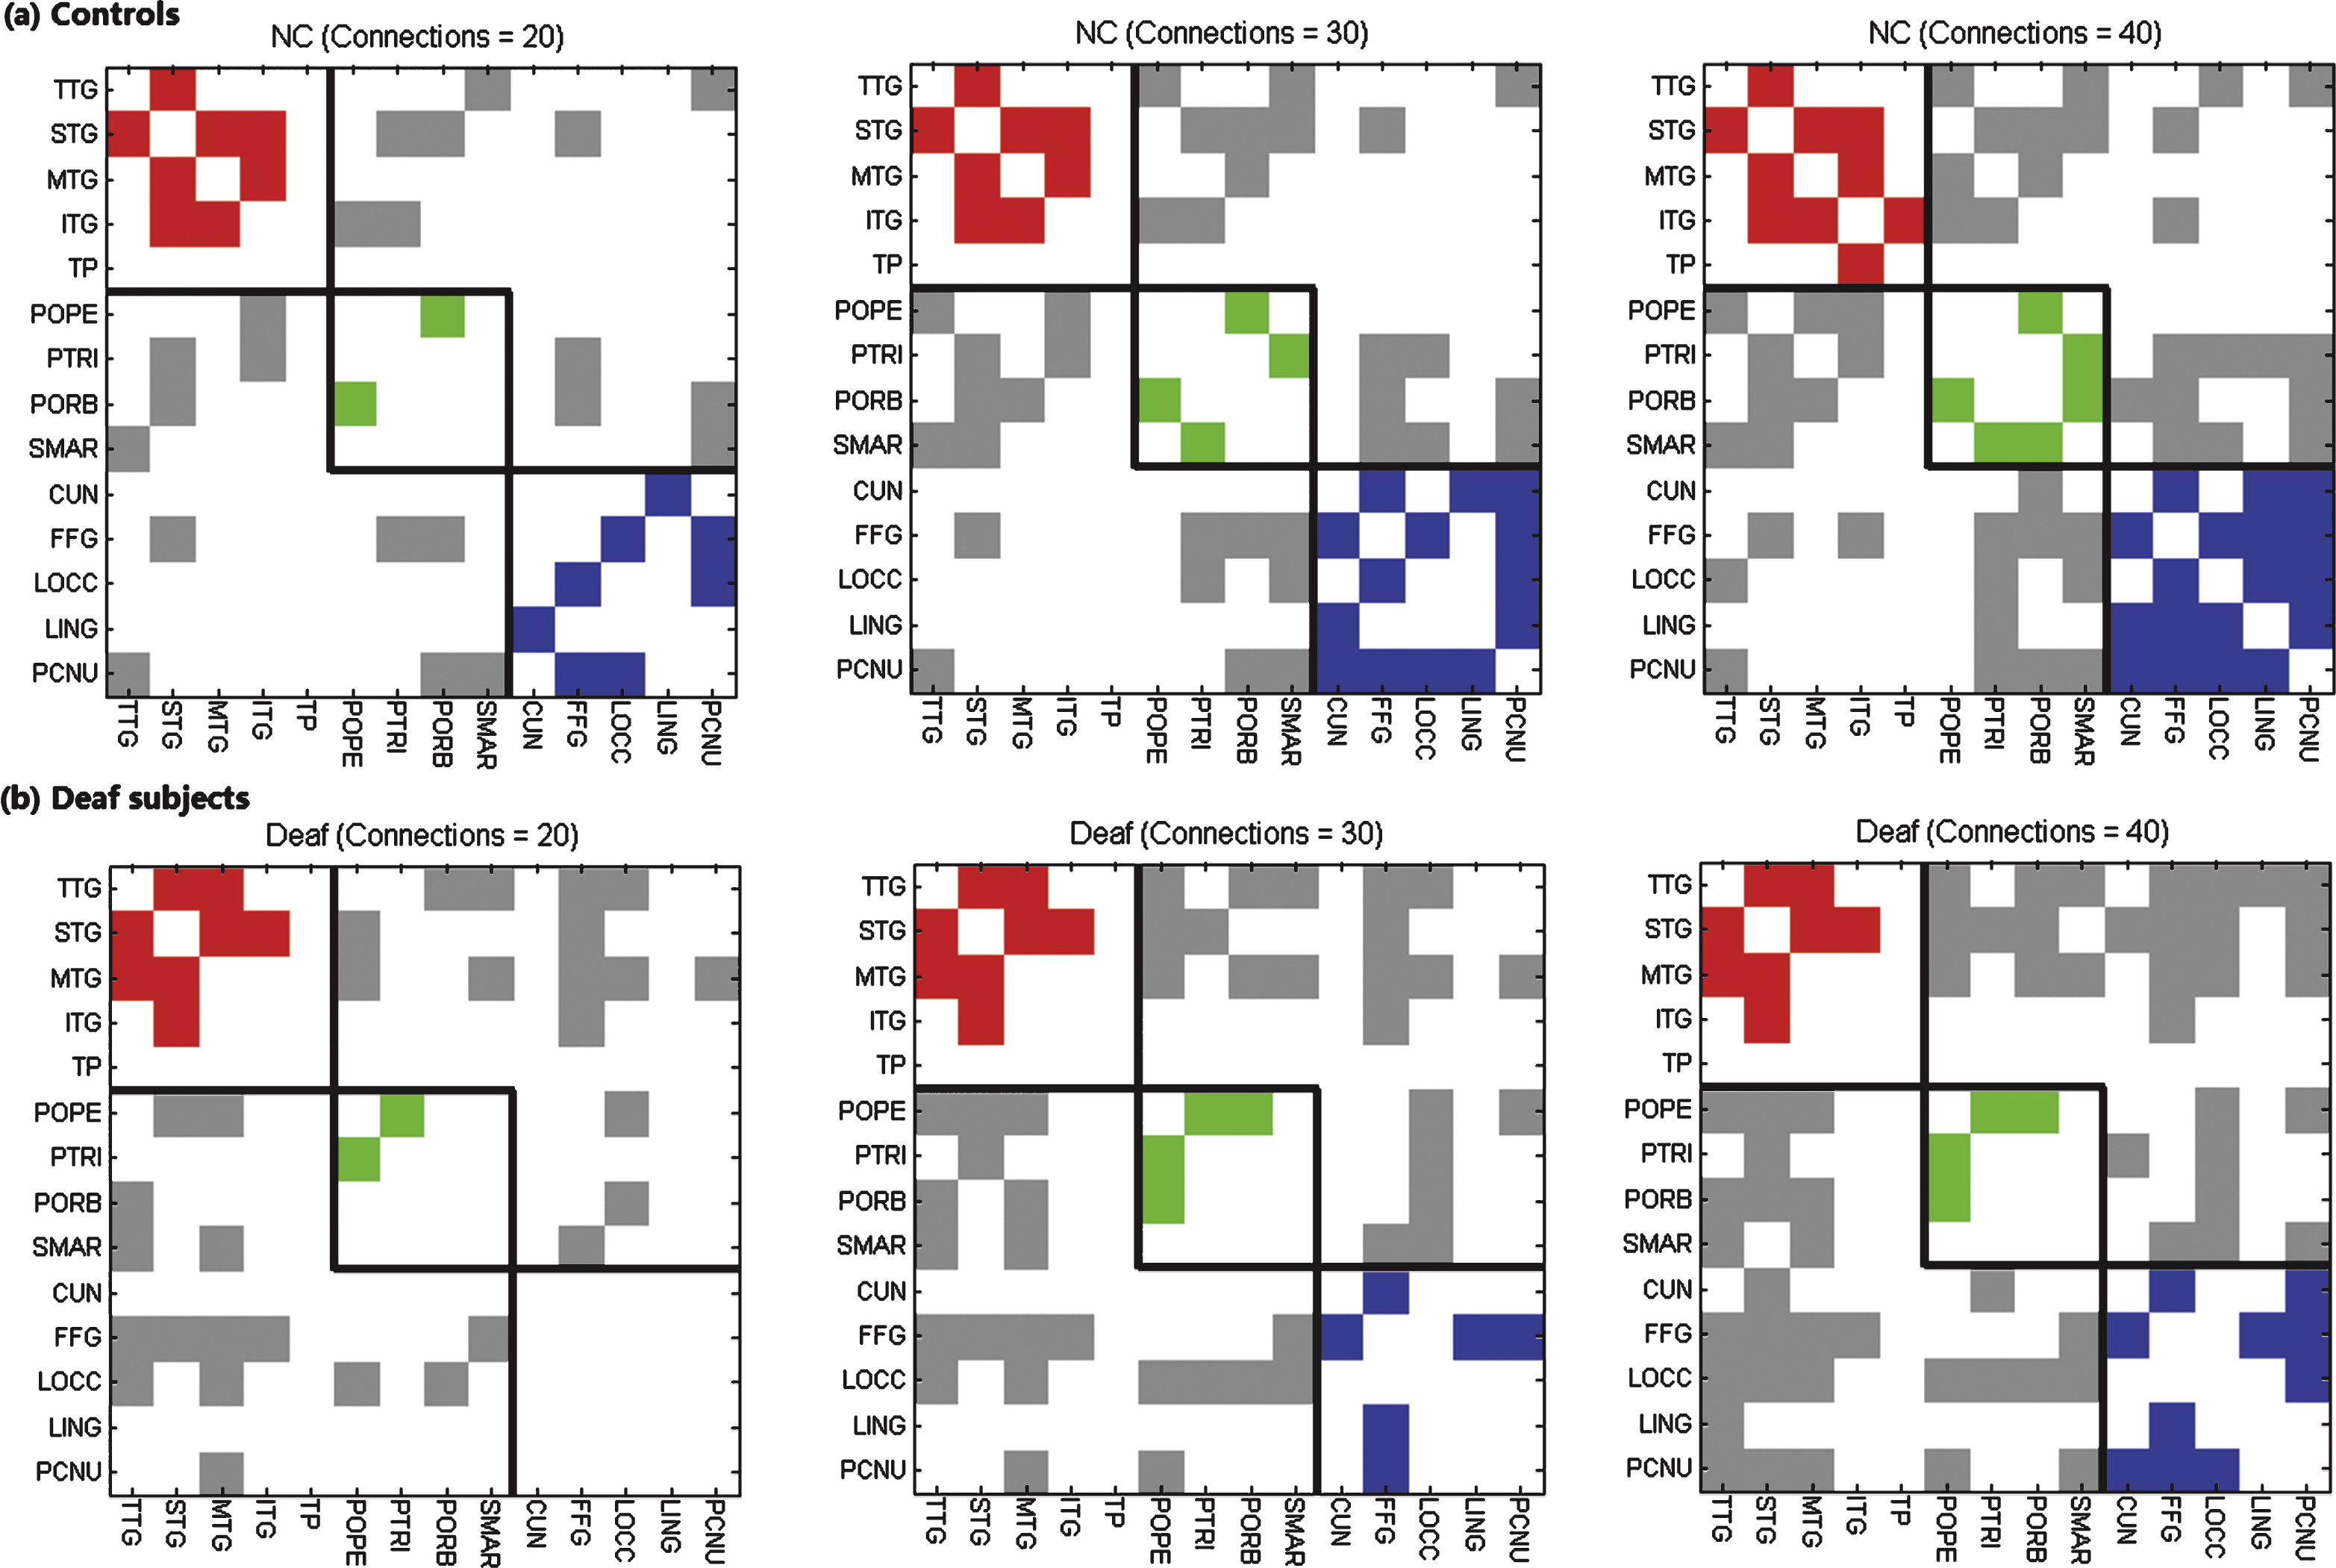 Binary matrices of grey matter connectivity with different sparsities (20, 30 and 40 connections over a total of 91 possible connections) for (a) normal controls and (b) deaf subjects respectively. The colors of red, green and blue indicate connections within auditory, language, and visual systems respectively, and the grey color represents connections between these systems. Black lines divide the 14 ROIs into auditory, language and visual systems accordingly.